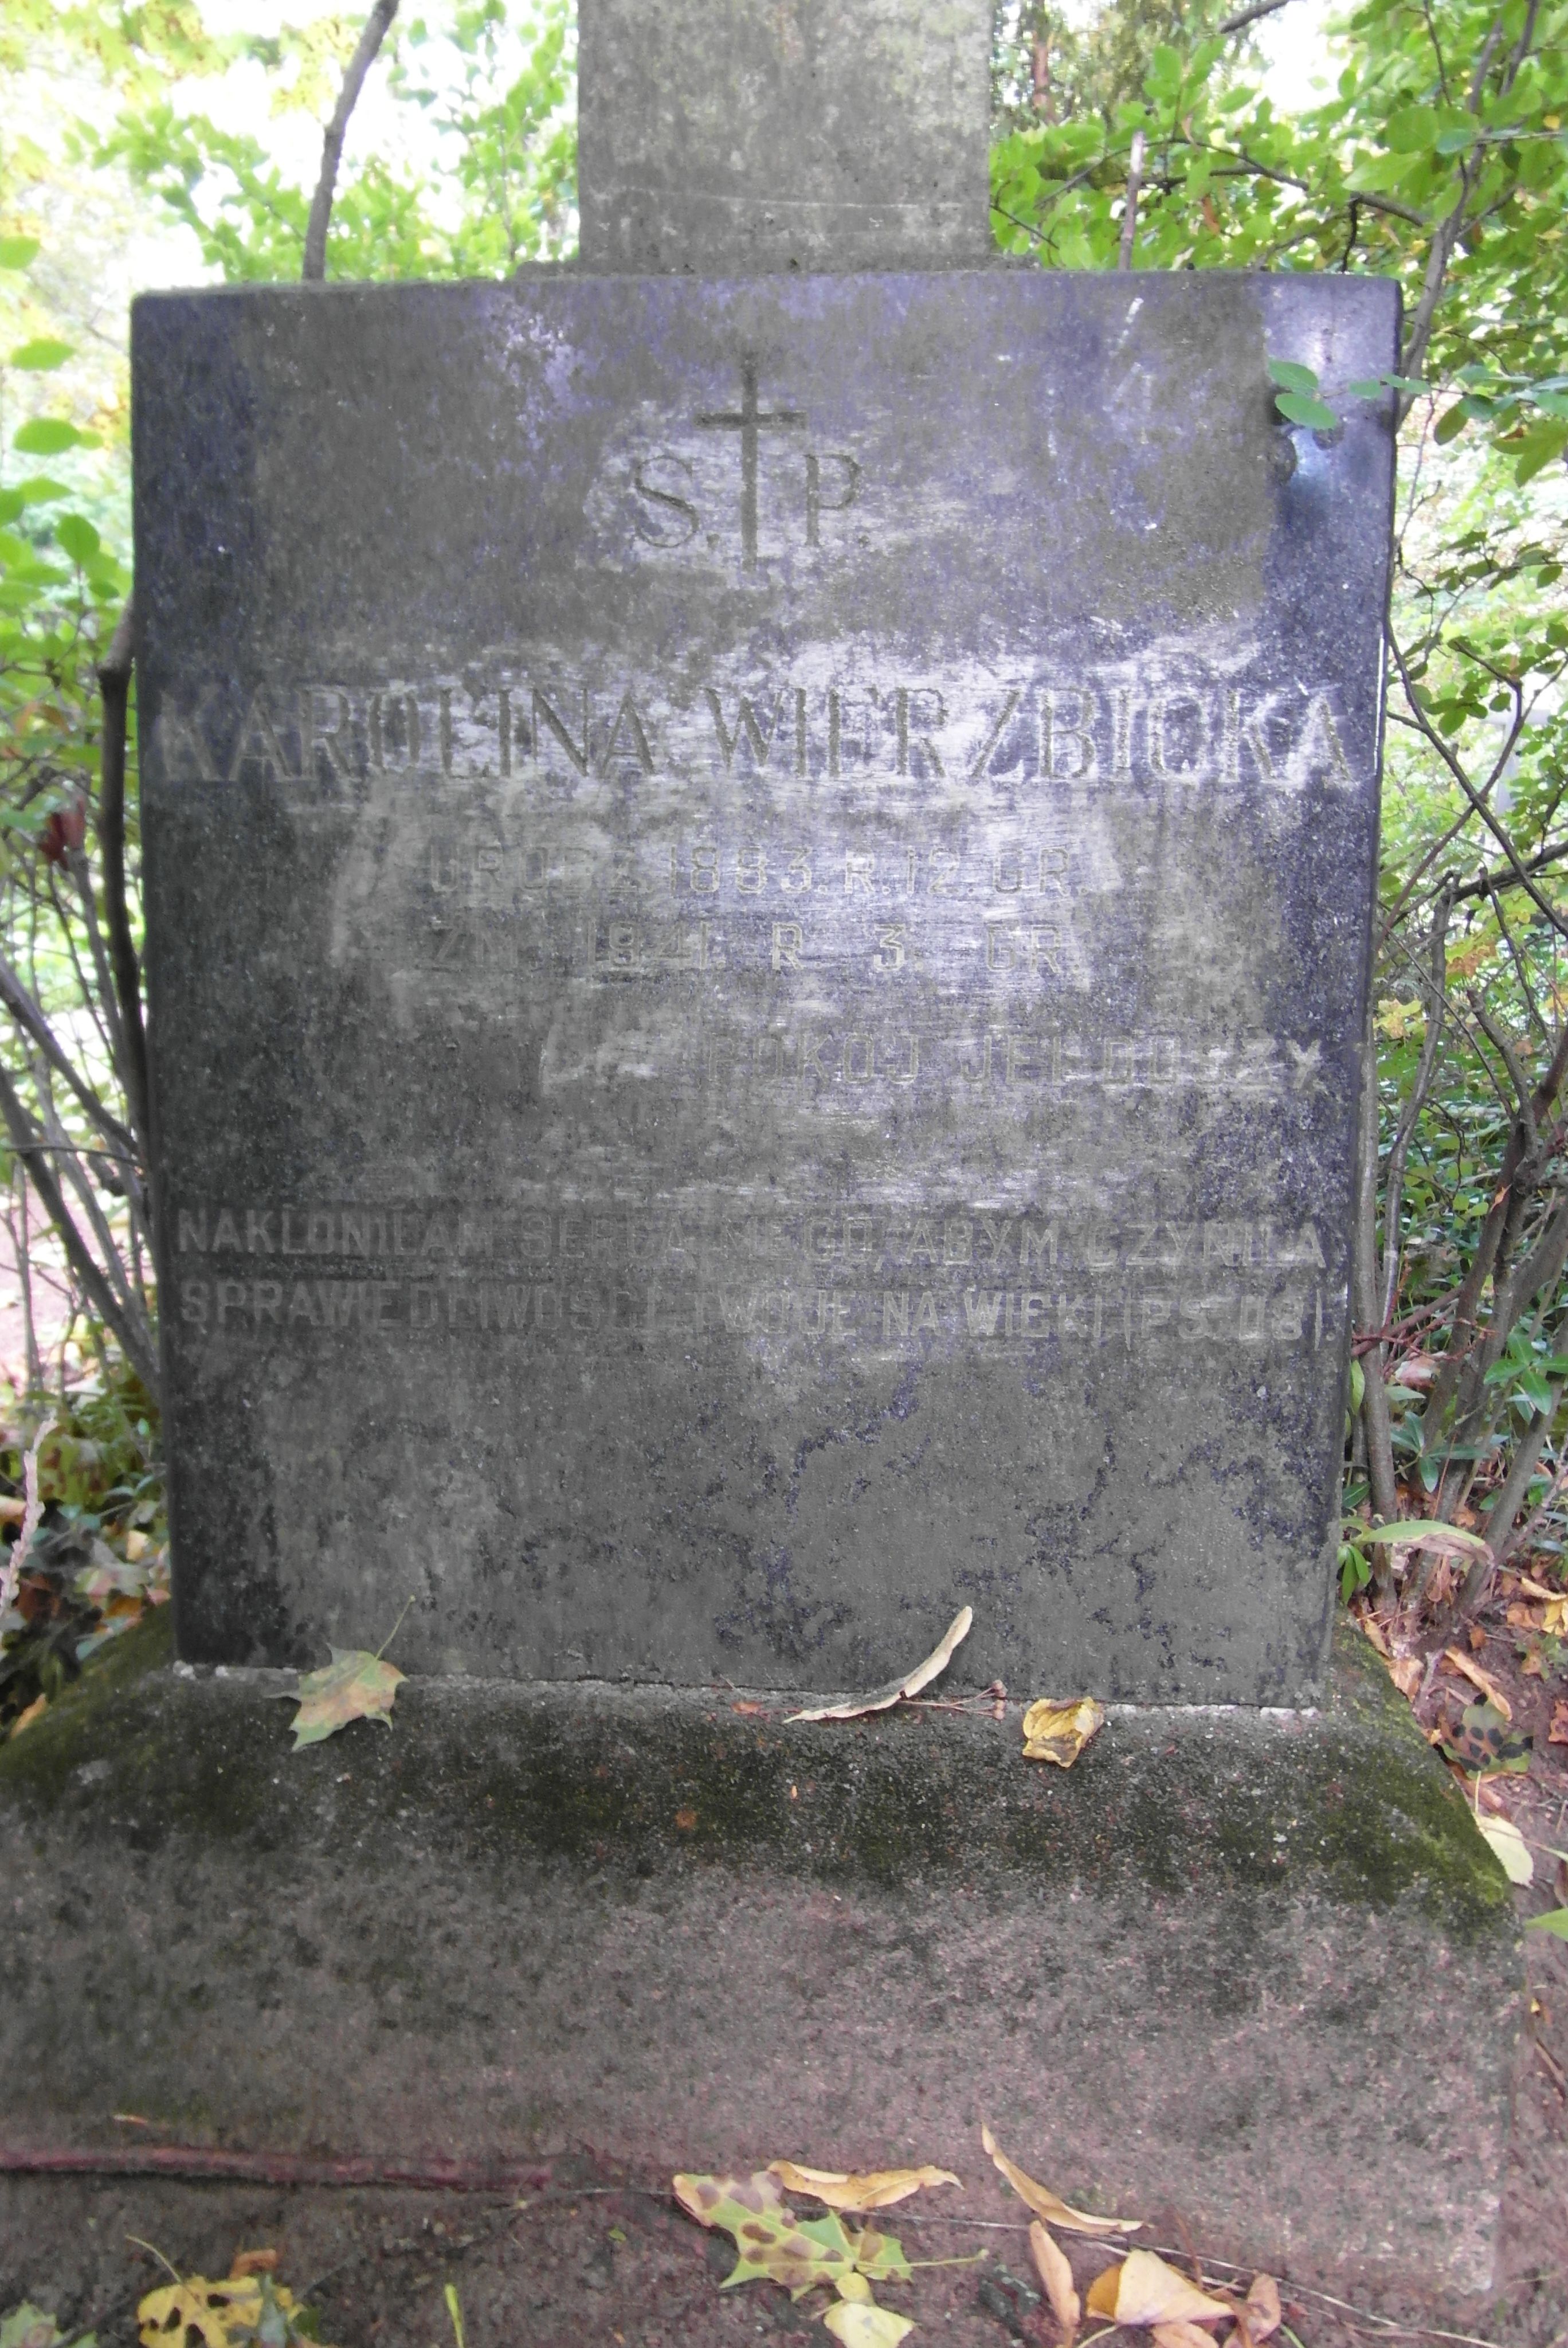 Inscription from the tombstone of Karolina Wierzbicka, St Michael's cemetery in Riga, as of 2021.